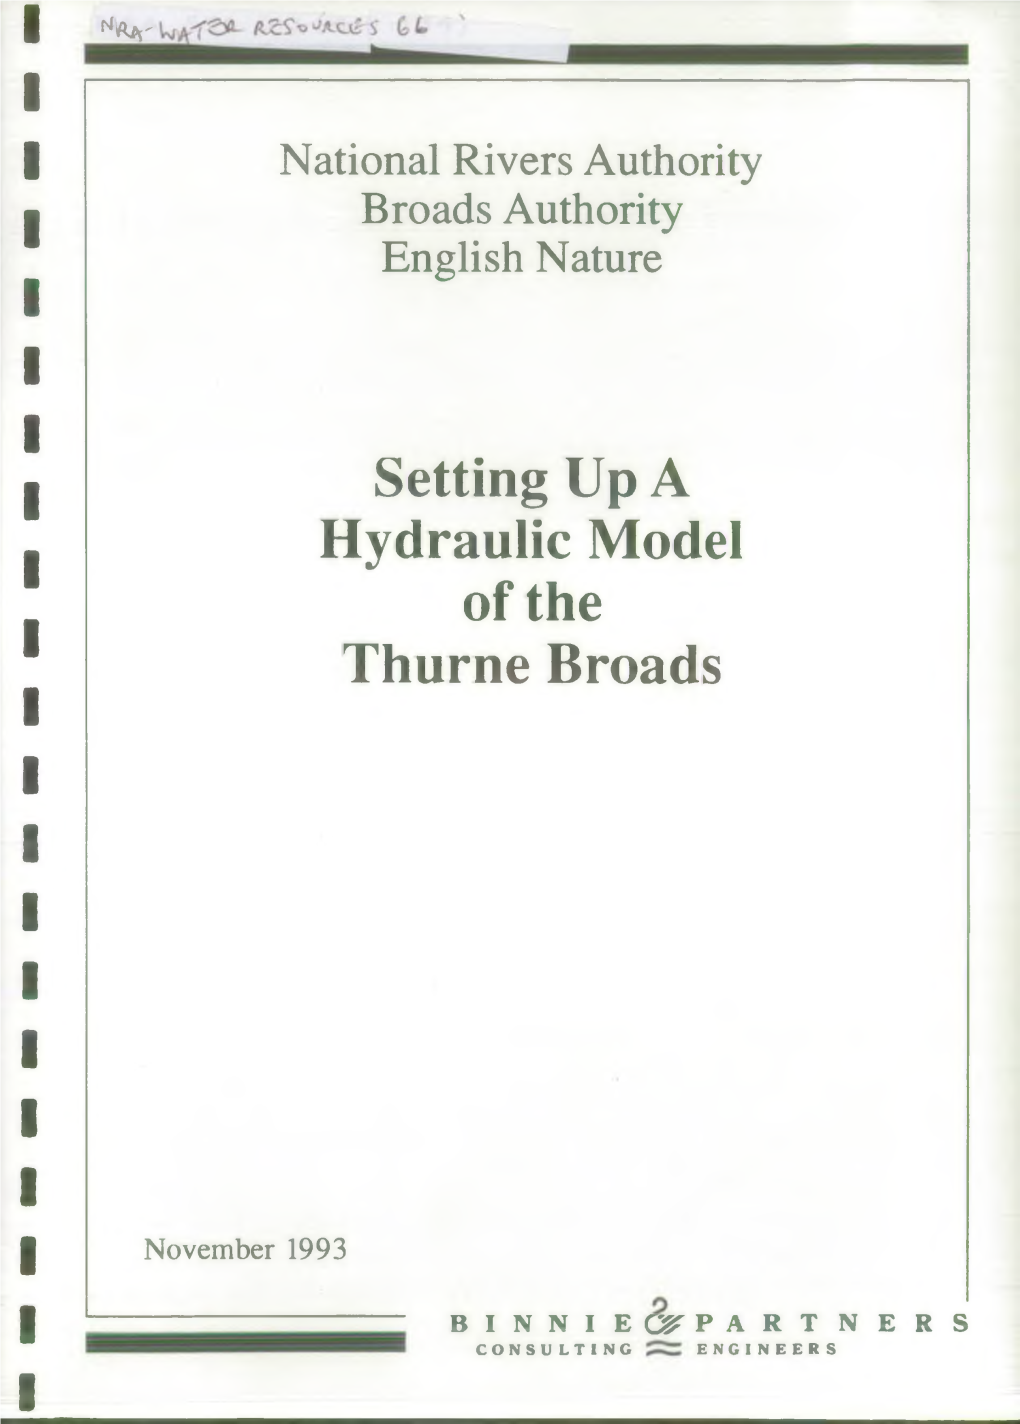 Setting up a Hydraulic Model of the Thurne Broads